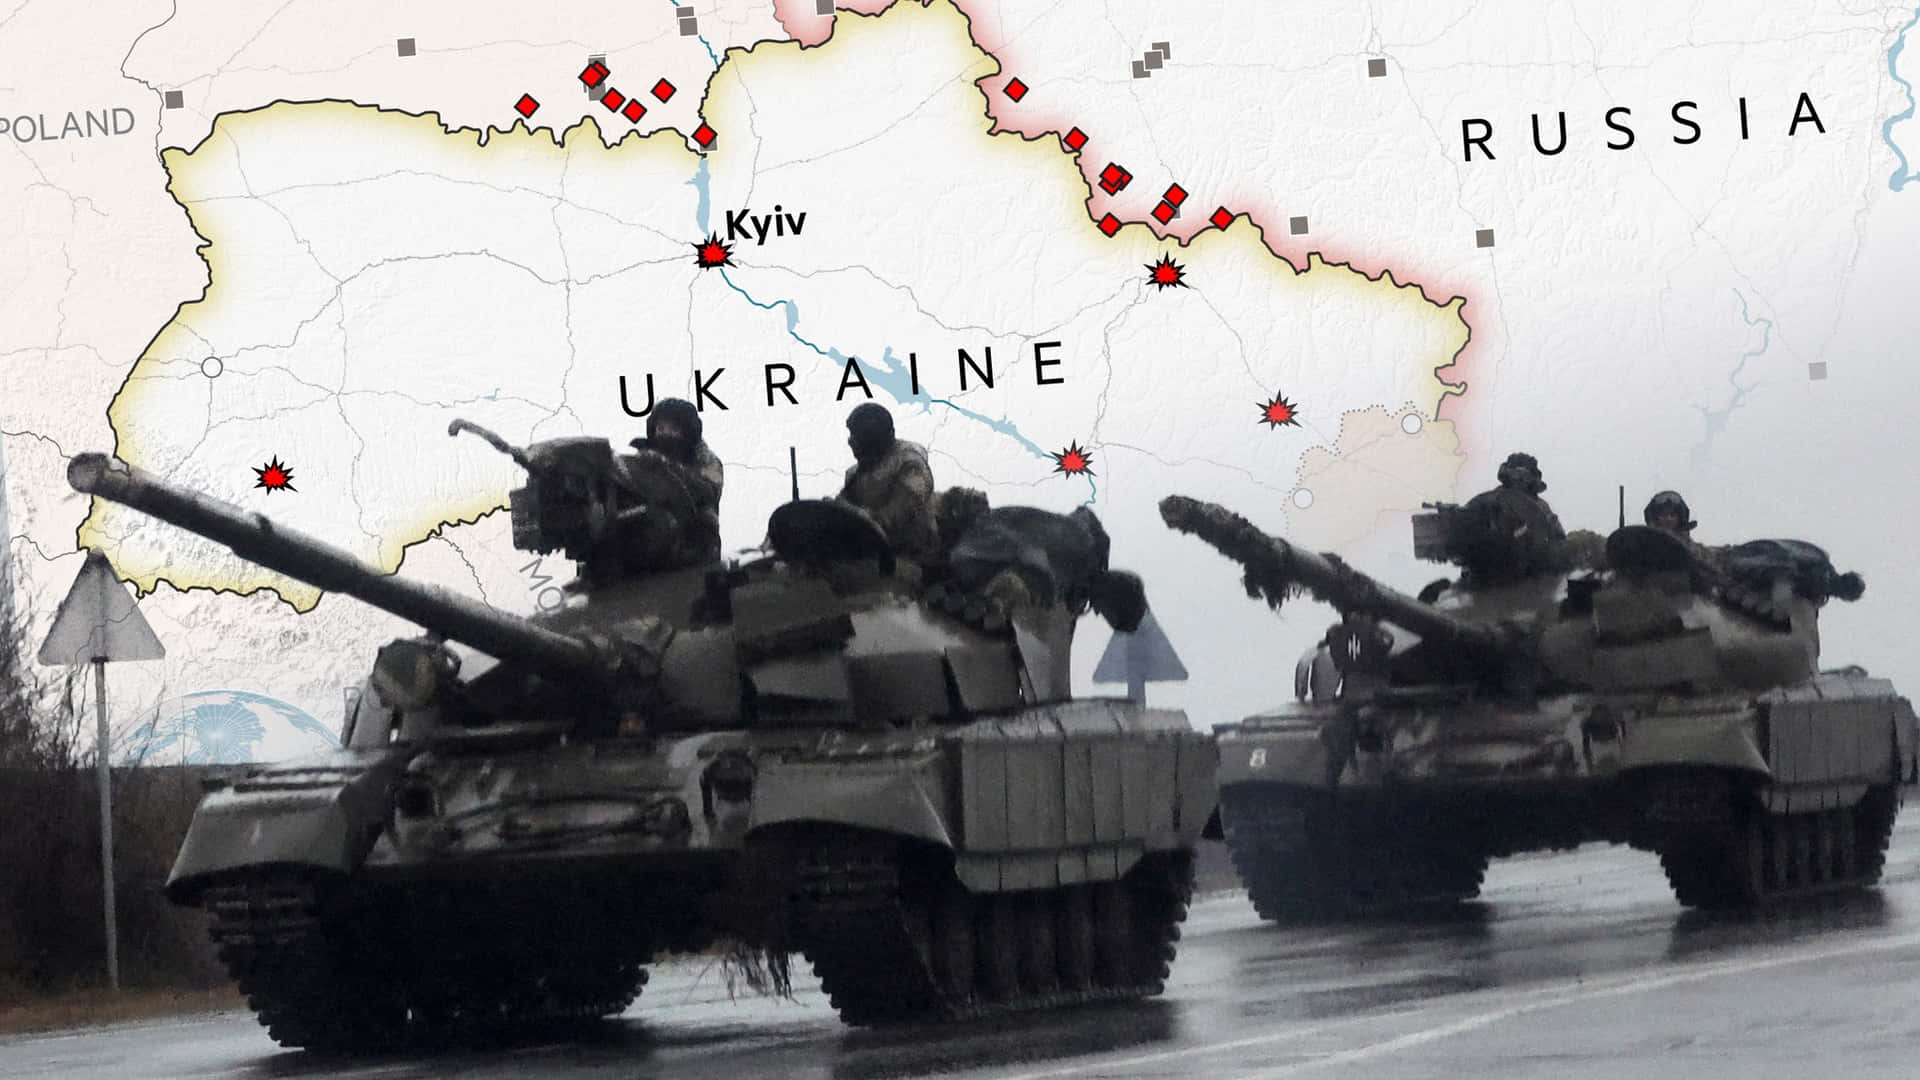 Ukraine's Military Forces On The Road With A Map